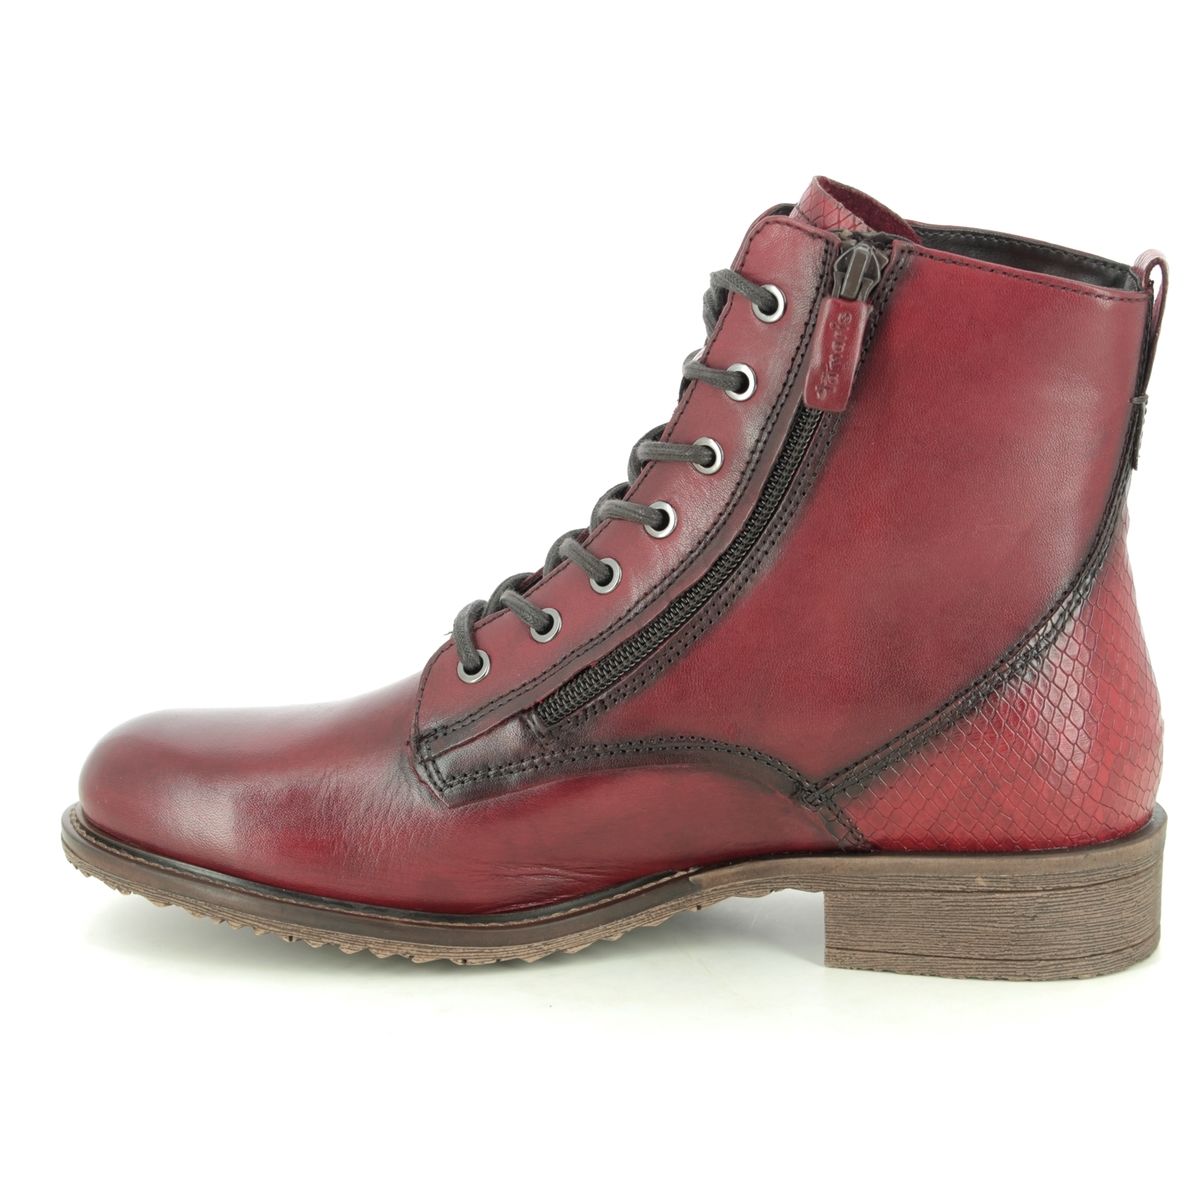 Tamaris Anouk 25211-25-591 Red leather Lace Up Boots